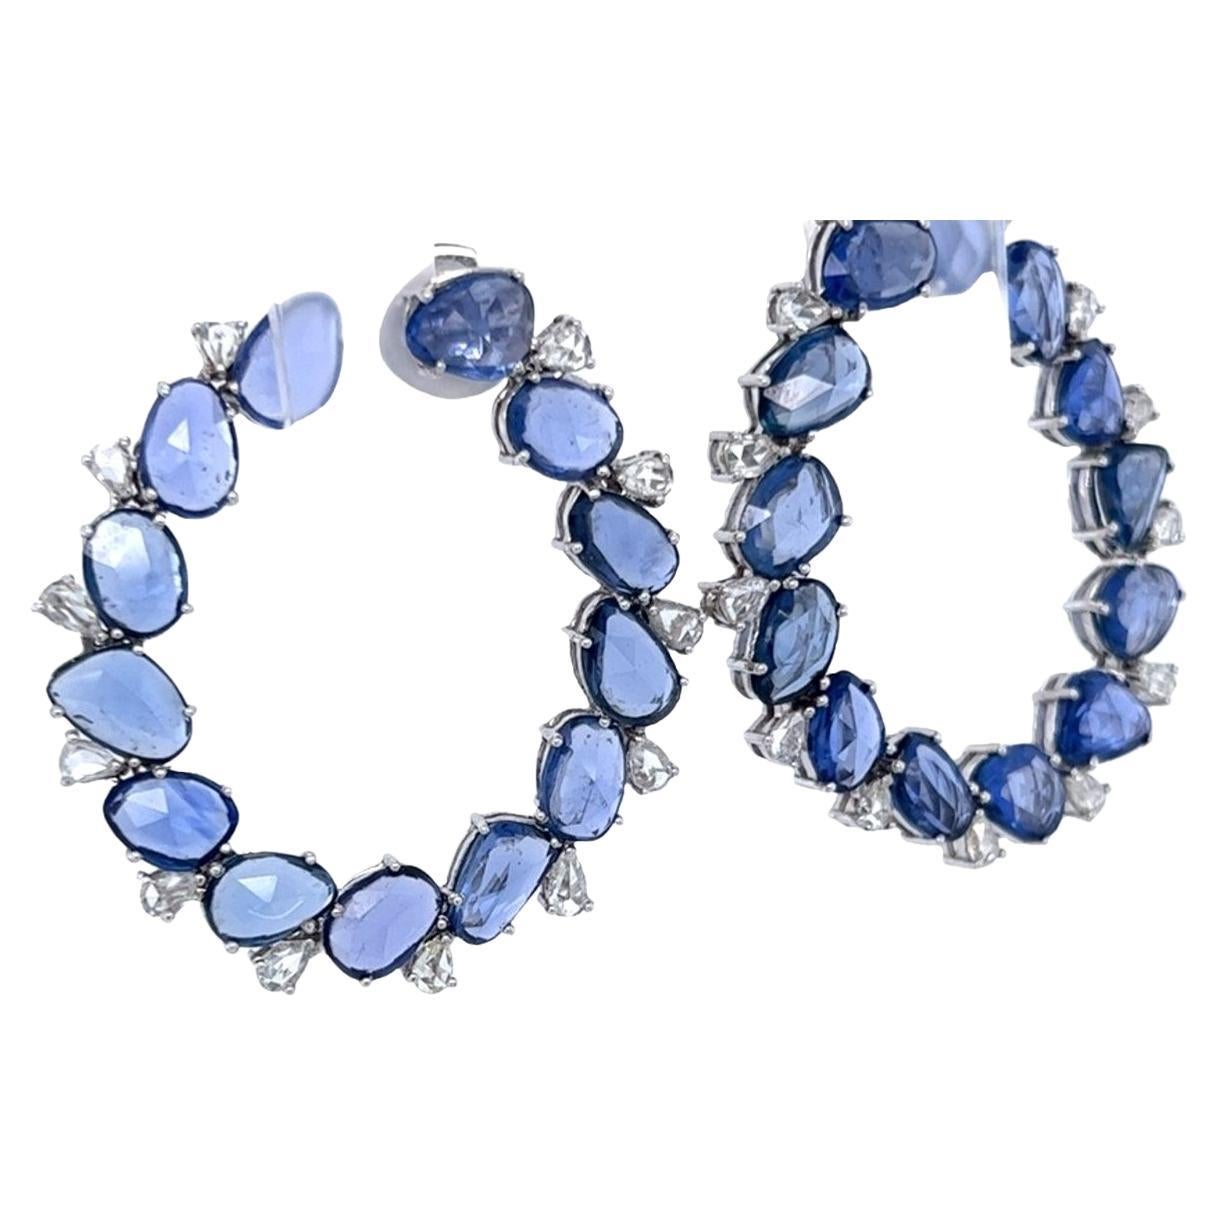 Vibrant blue sapphire and diamond half-hoop / C Shape circle stud earrings in 18 karat white gold. The 26 sapphires are multi-shape and weigh 18.79 carats in total. Set between each sapphire is 24 small pear shape white diamonds weighing 1.81 carats